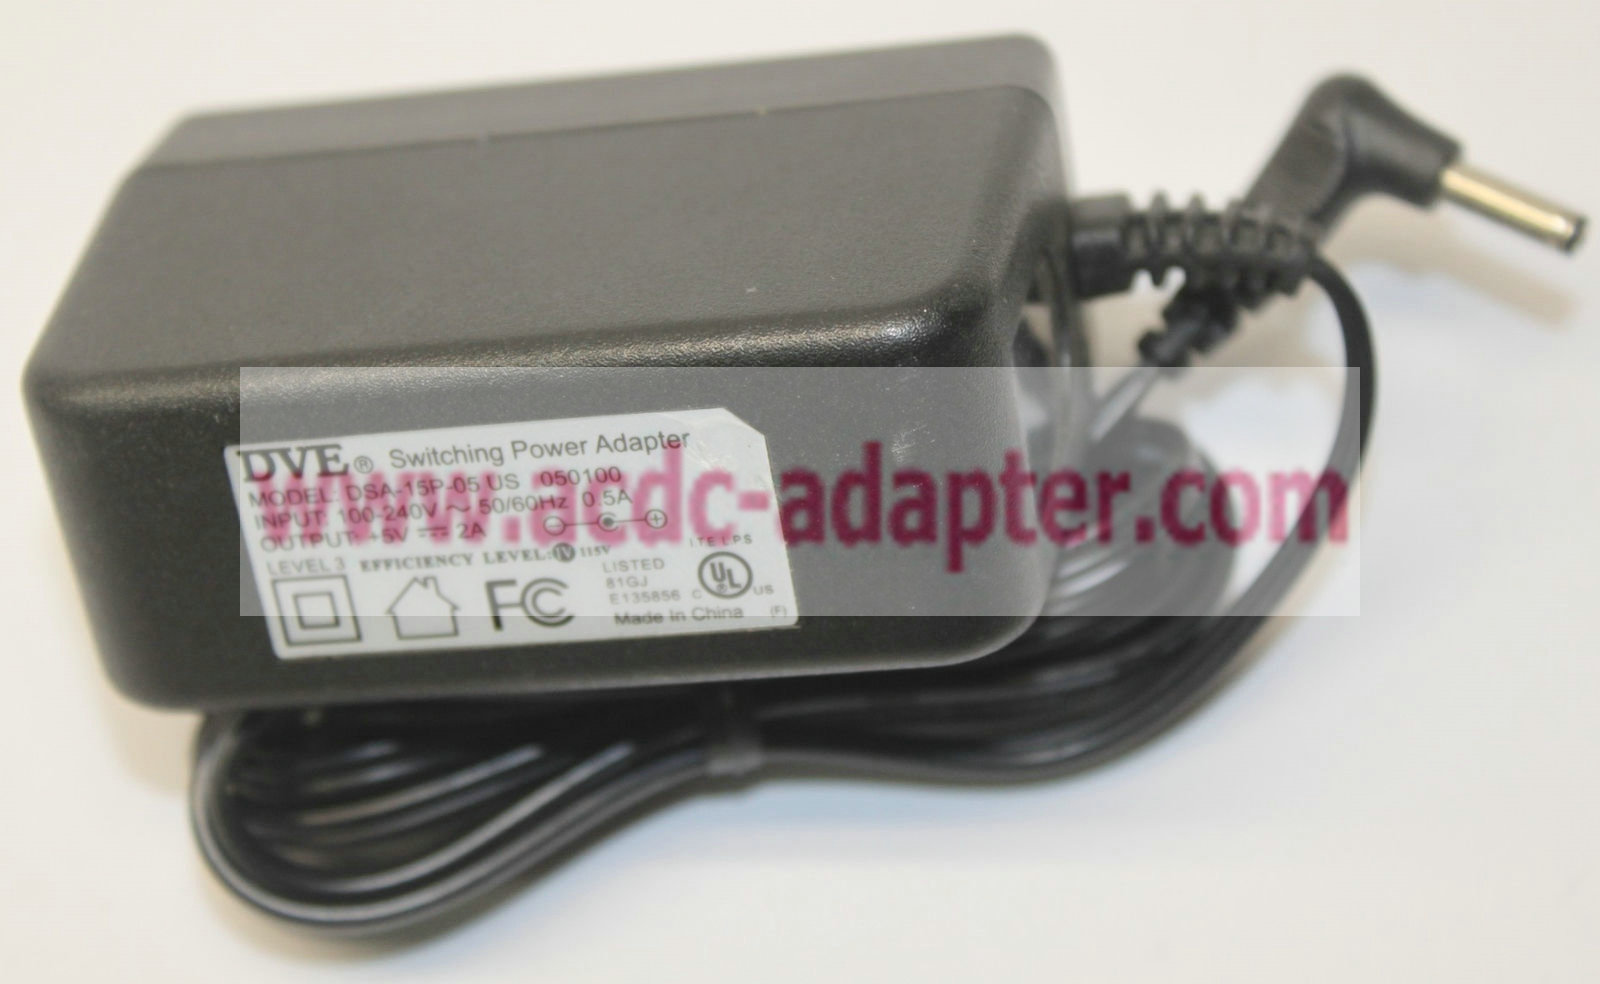 DVE DSA-15P-05 US 050100 5V 2A AC Adapter Switching Power Supply Wall Charger - Click Image to Close